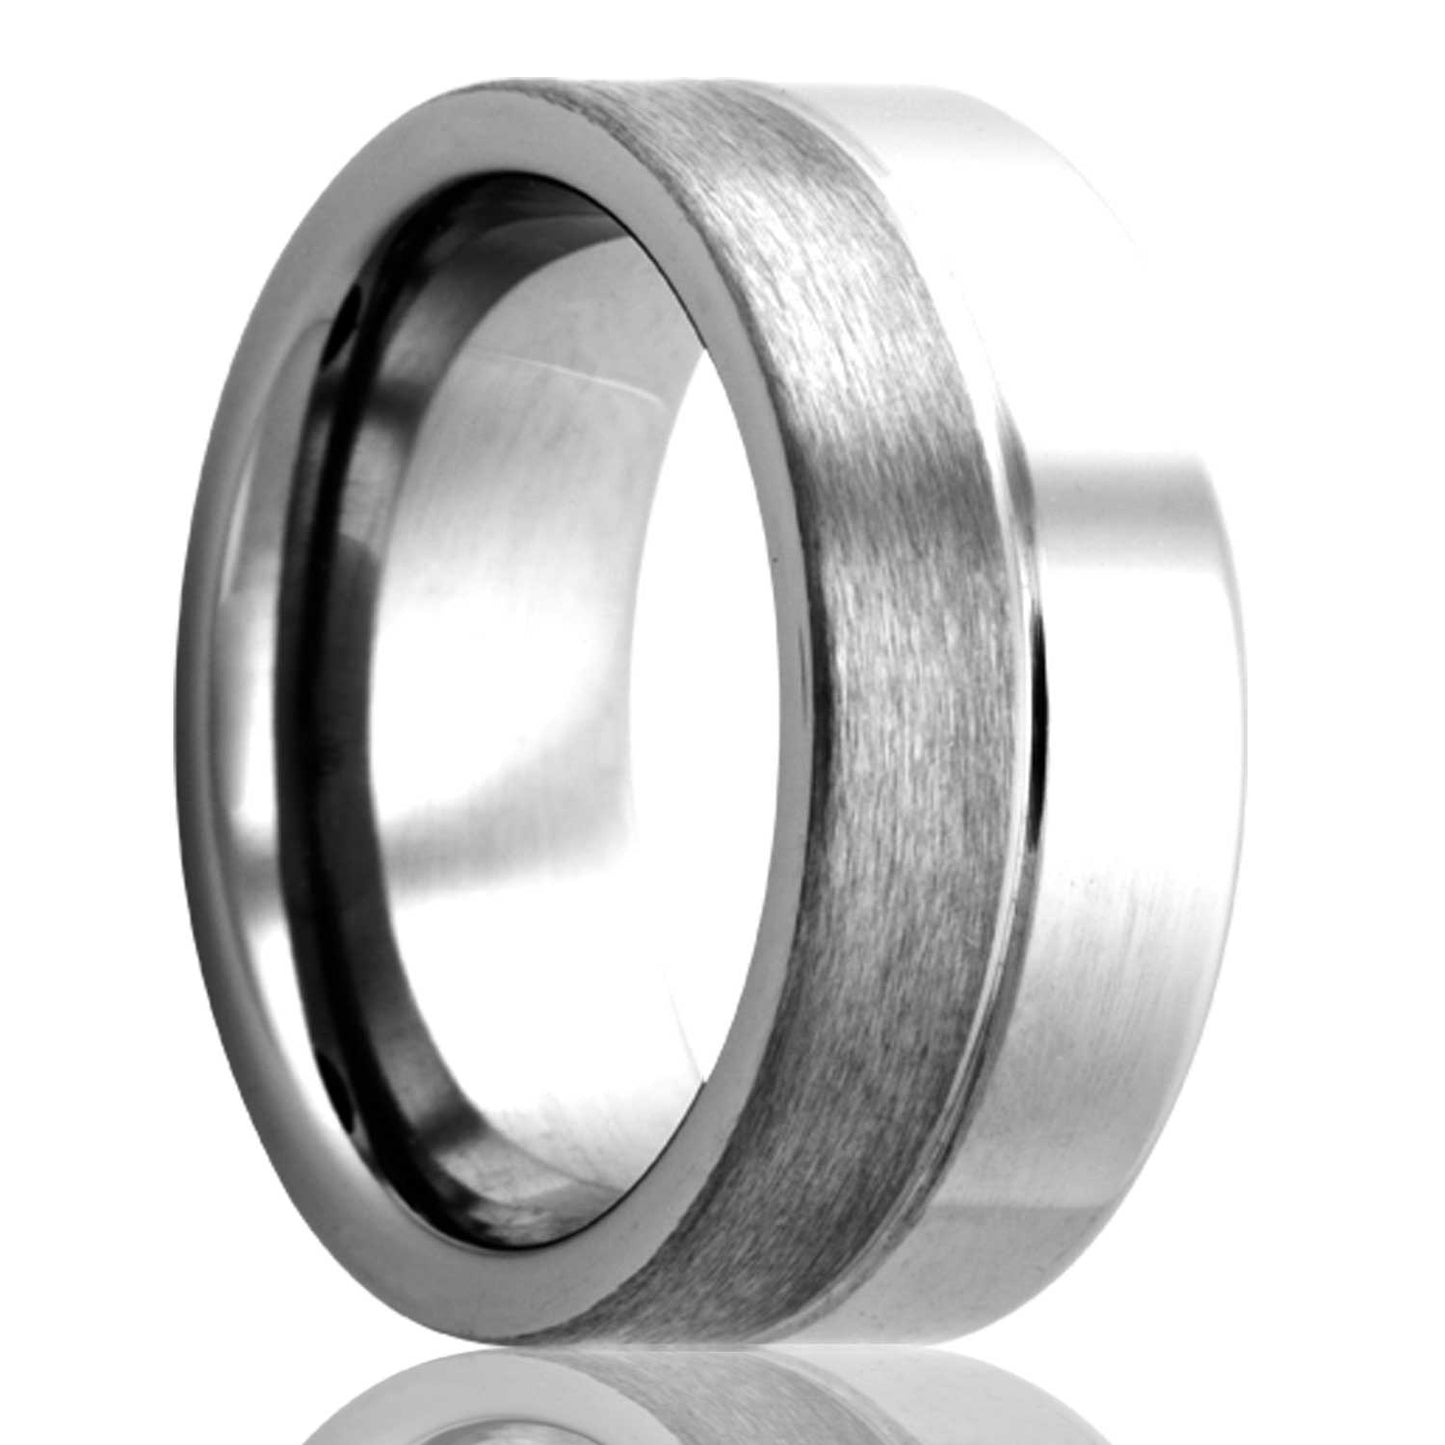 A grooved tungsten wedding band with half polished & satin finishes displayed on a neutral white background.